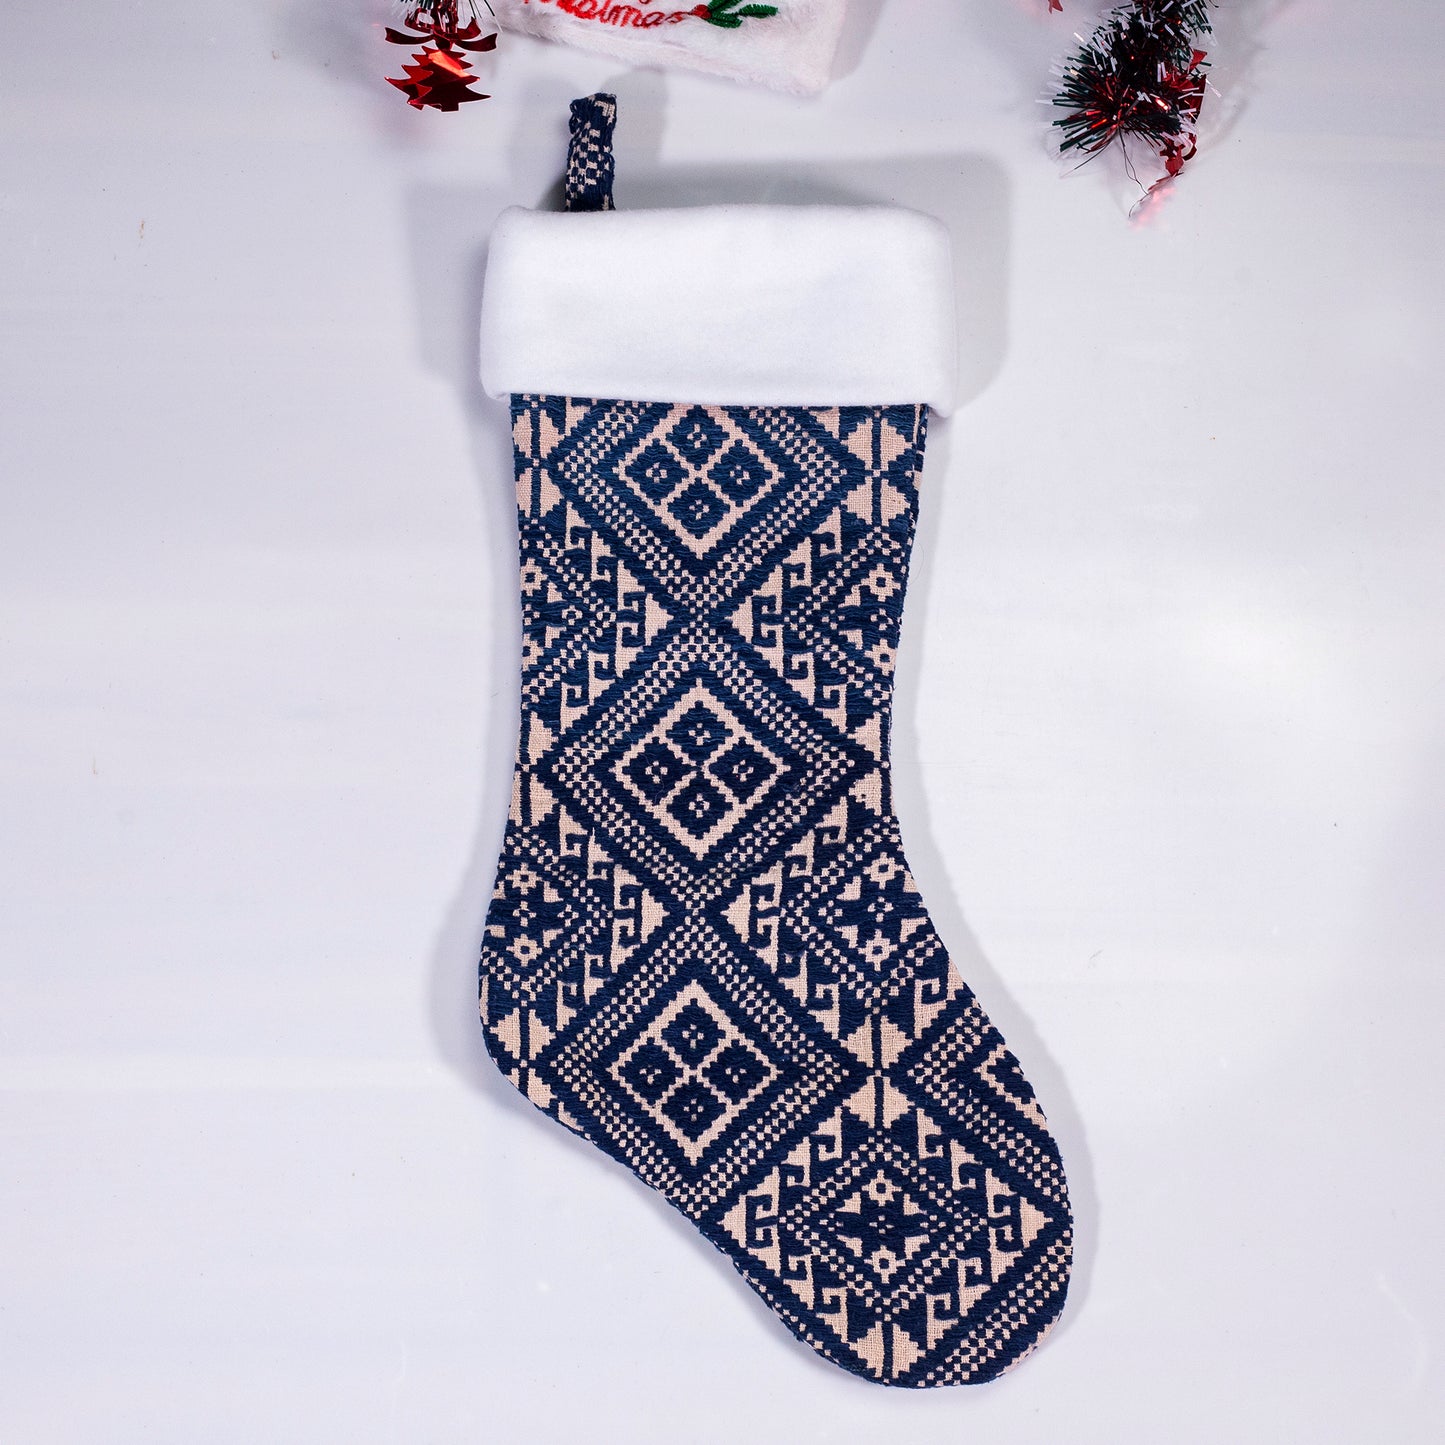 Christmas Stockings - Black and Blue embroidery